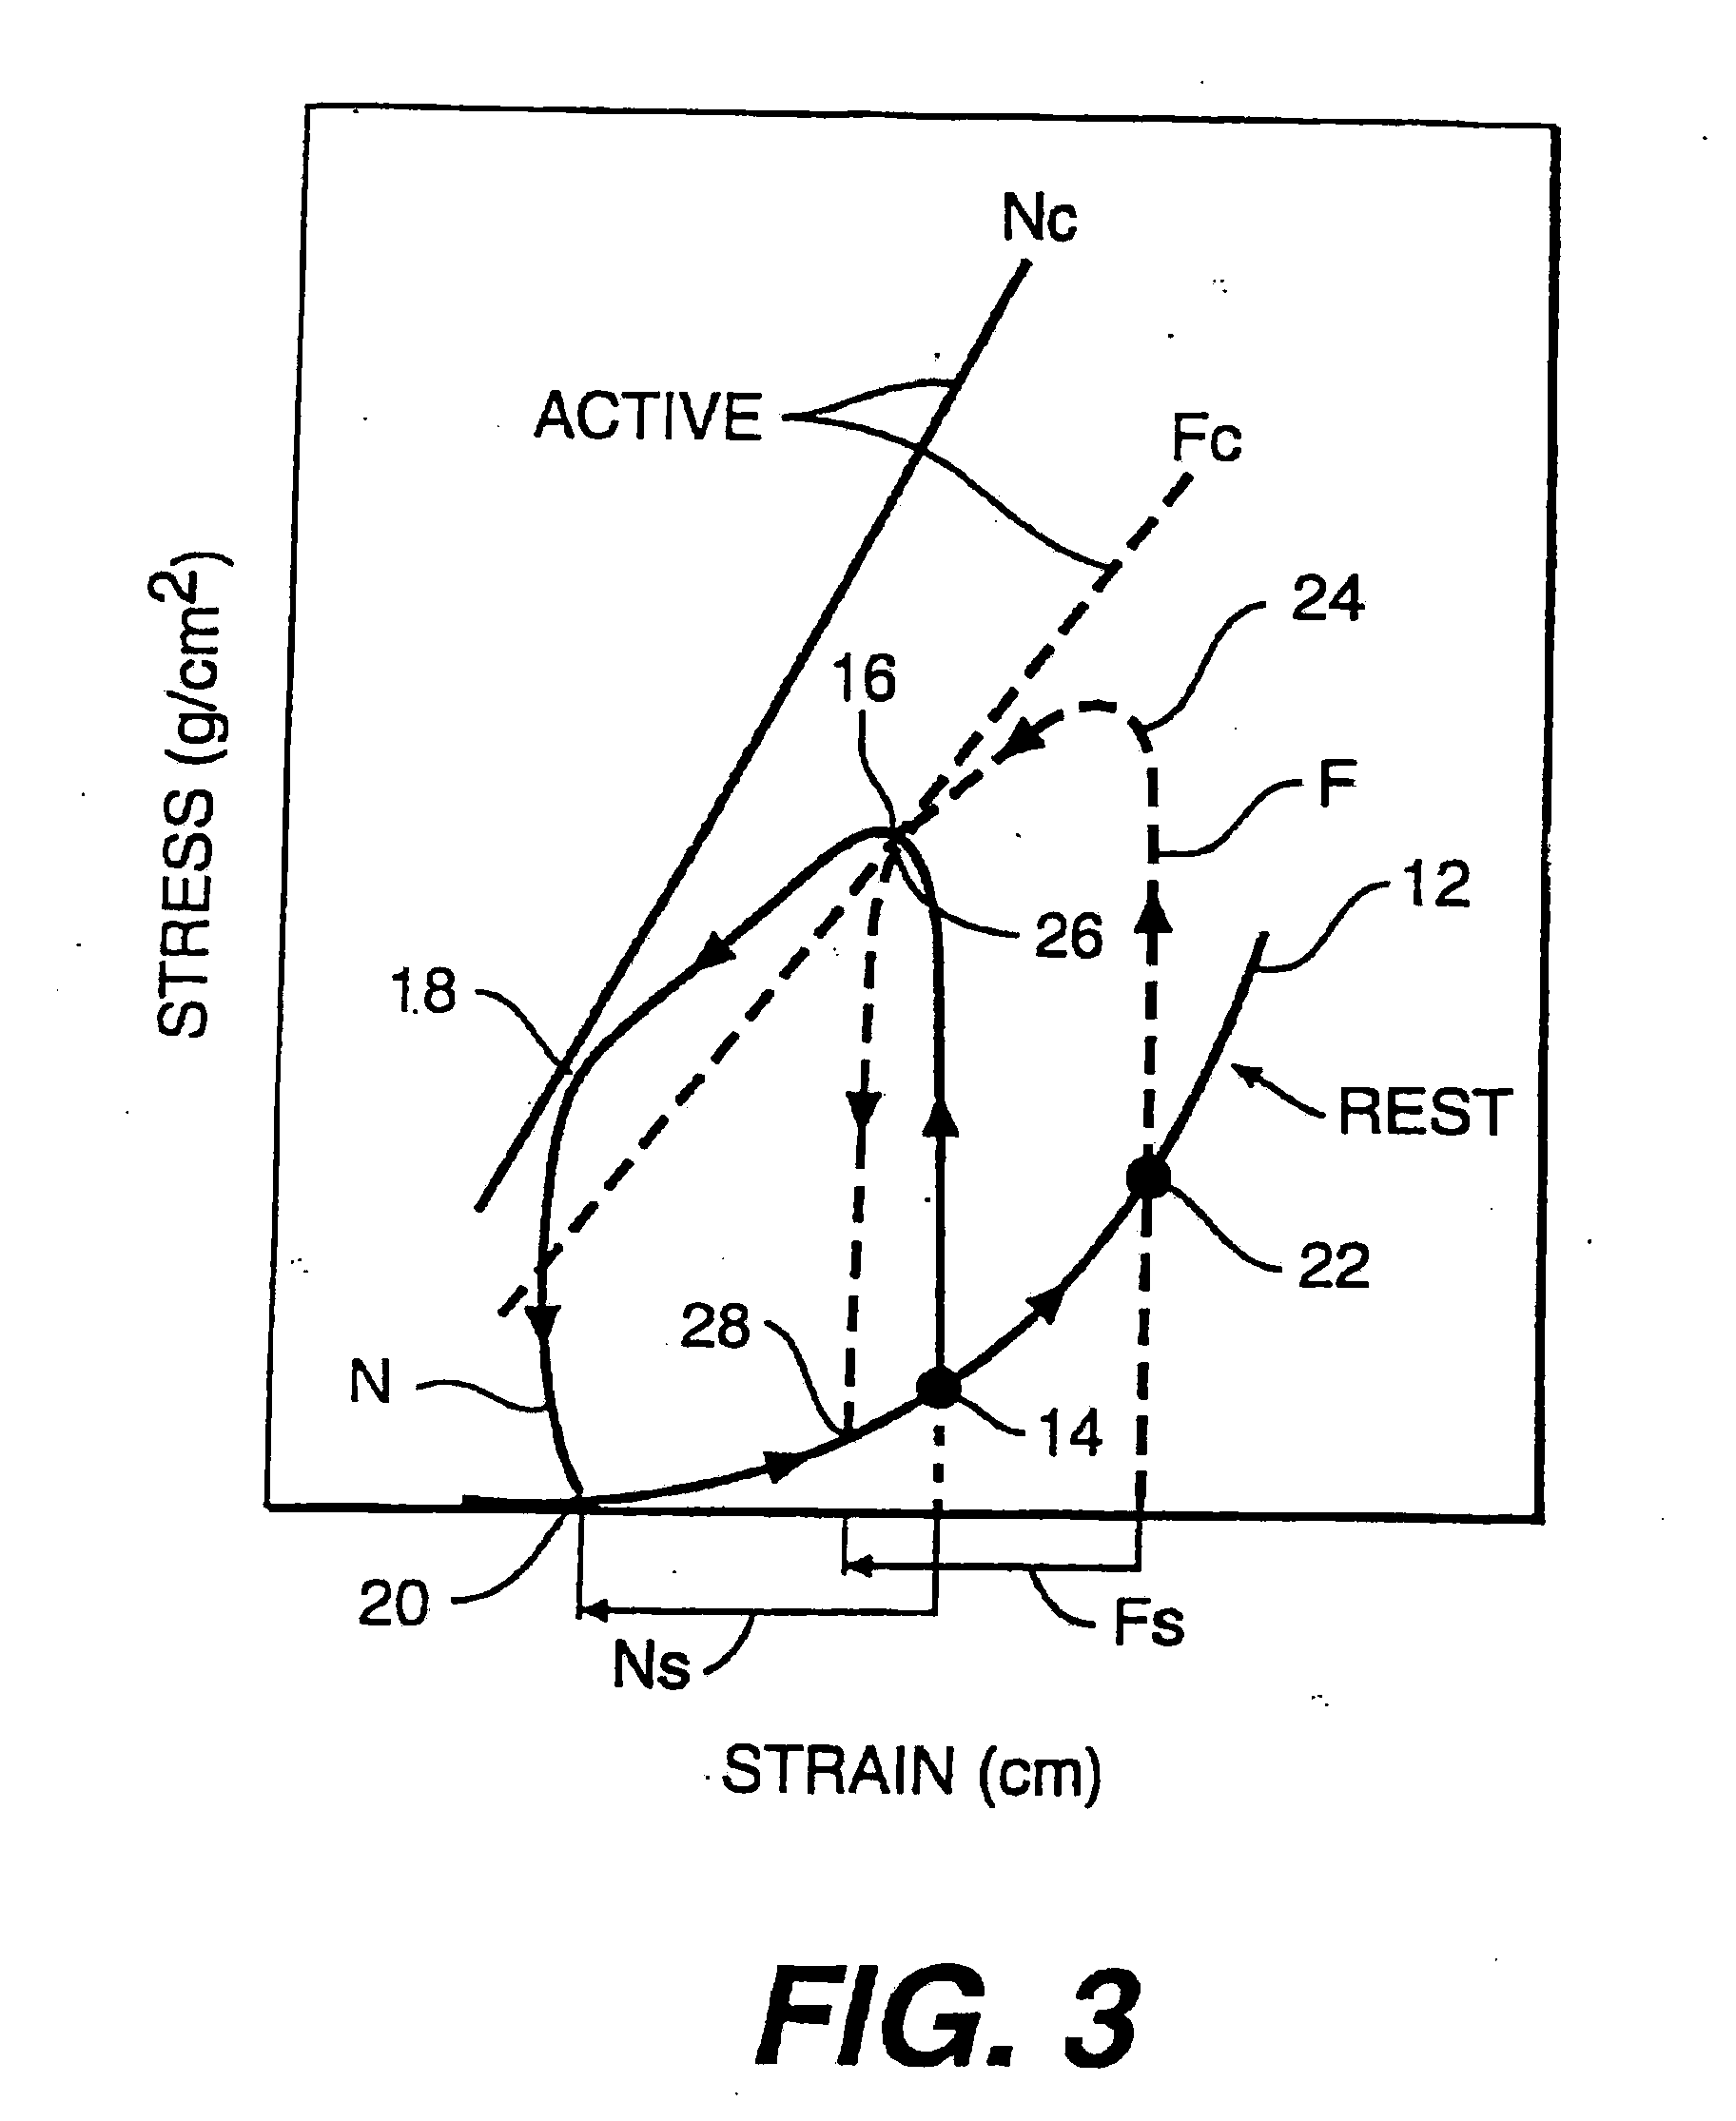 Heart Wall Tension Reduction Apparatus and Method